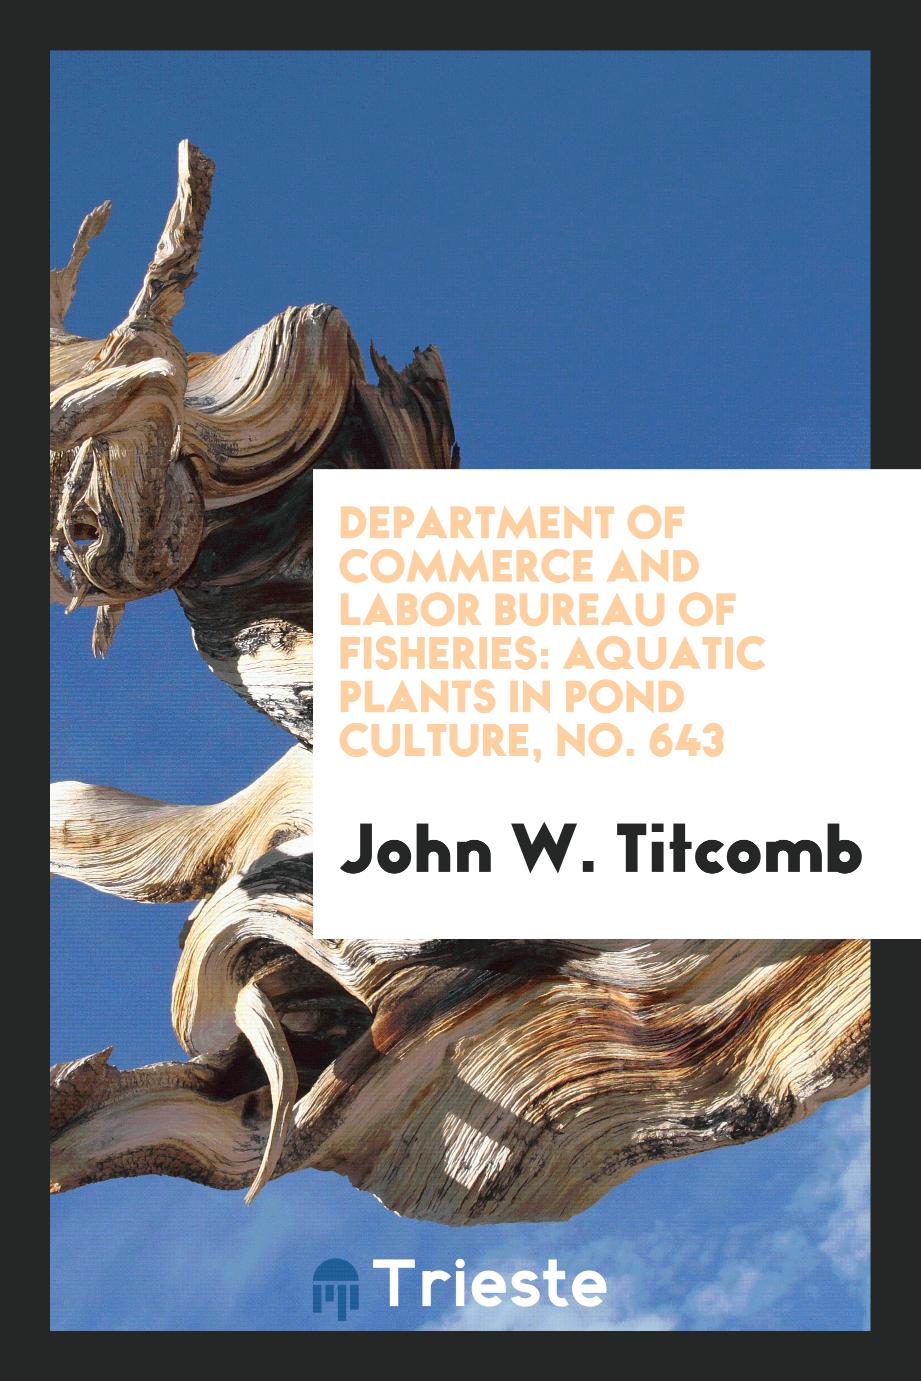 Department of commerce and labor bureau of fisheries: Aquatic plants in pond Culture, No. 643